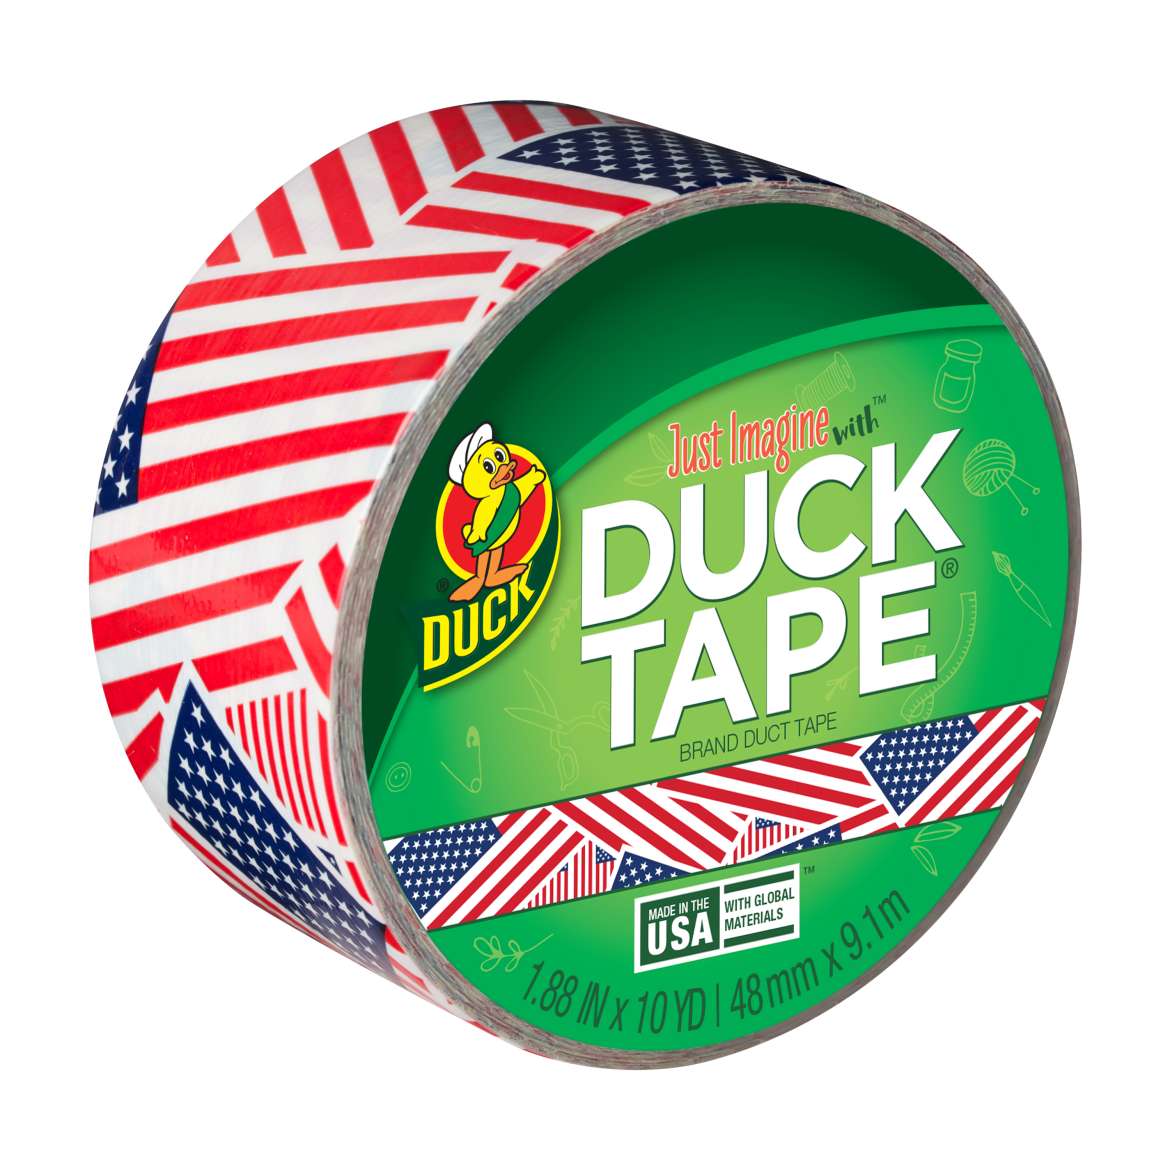 Printed Duck Tape® Brand Duct Tape - US Flag, 1.88 in. x 10 yd.